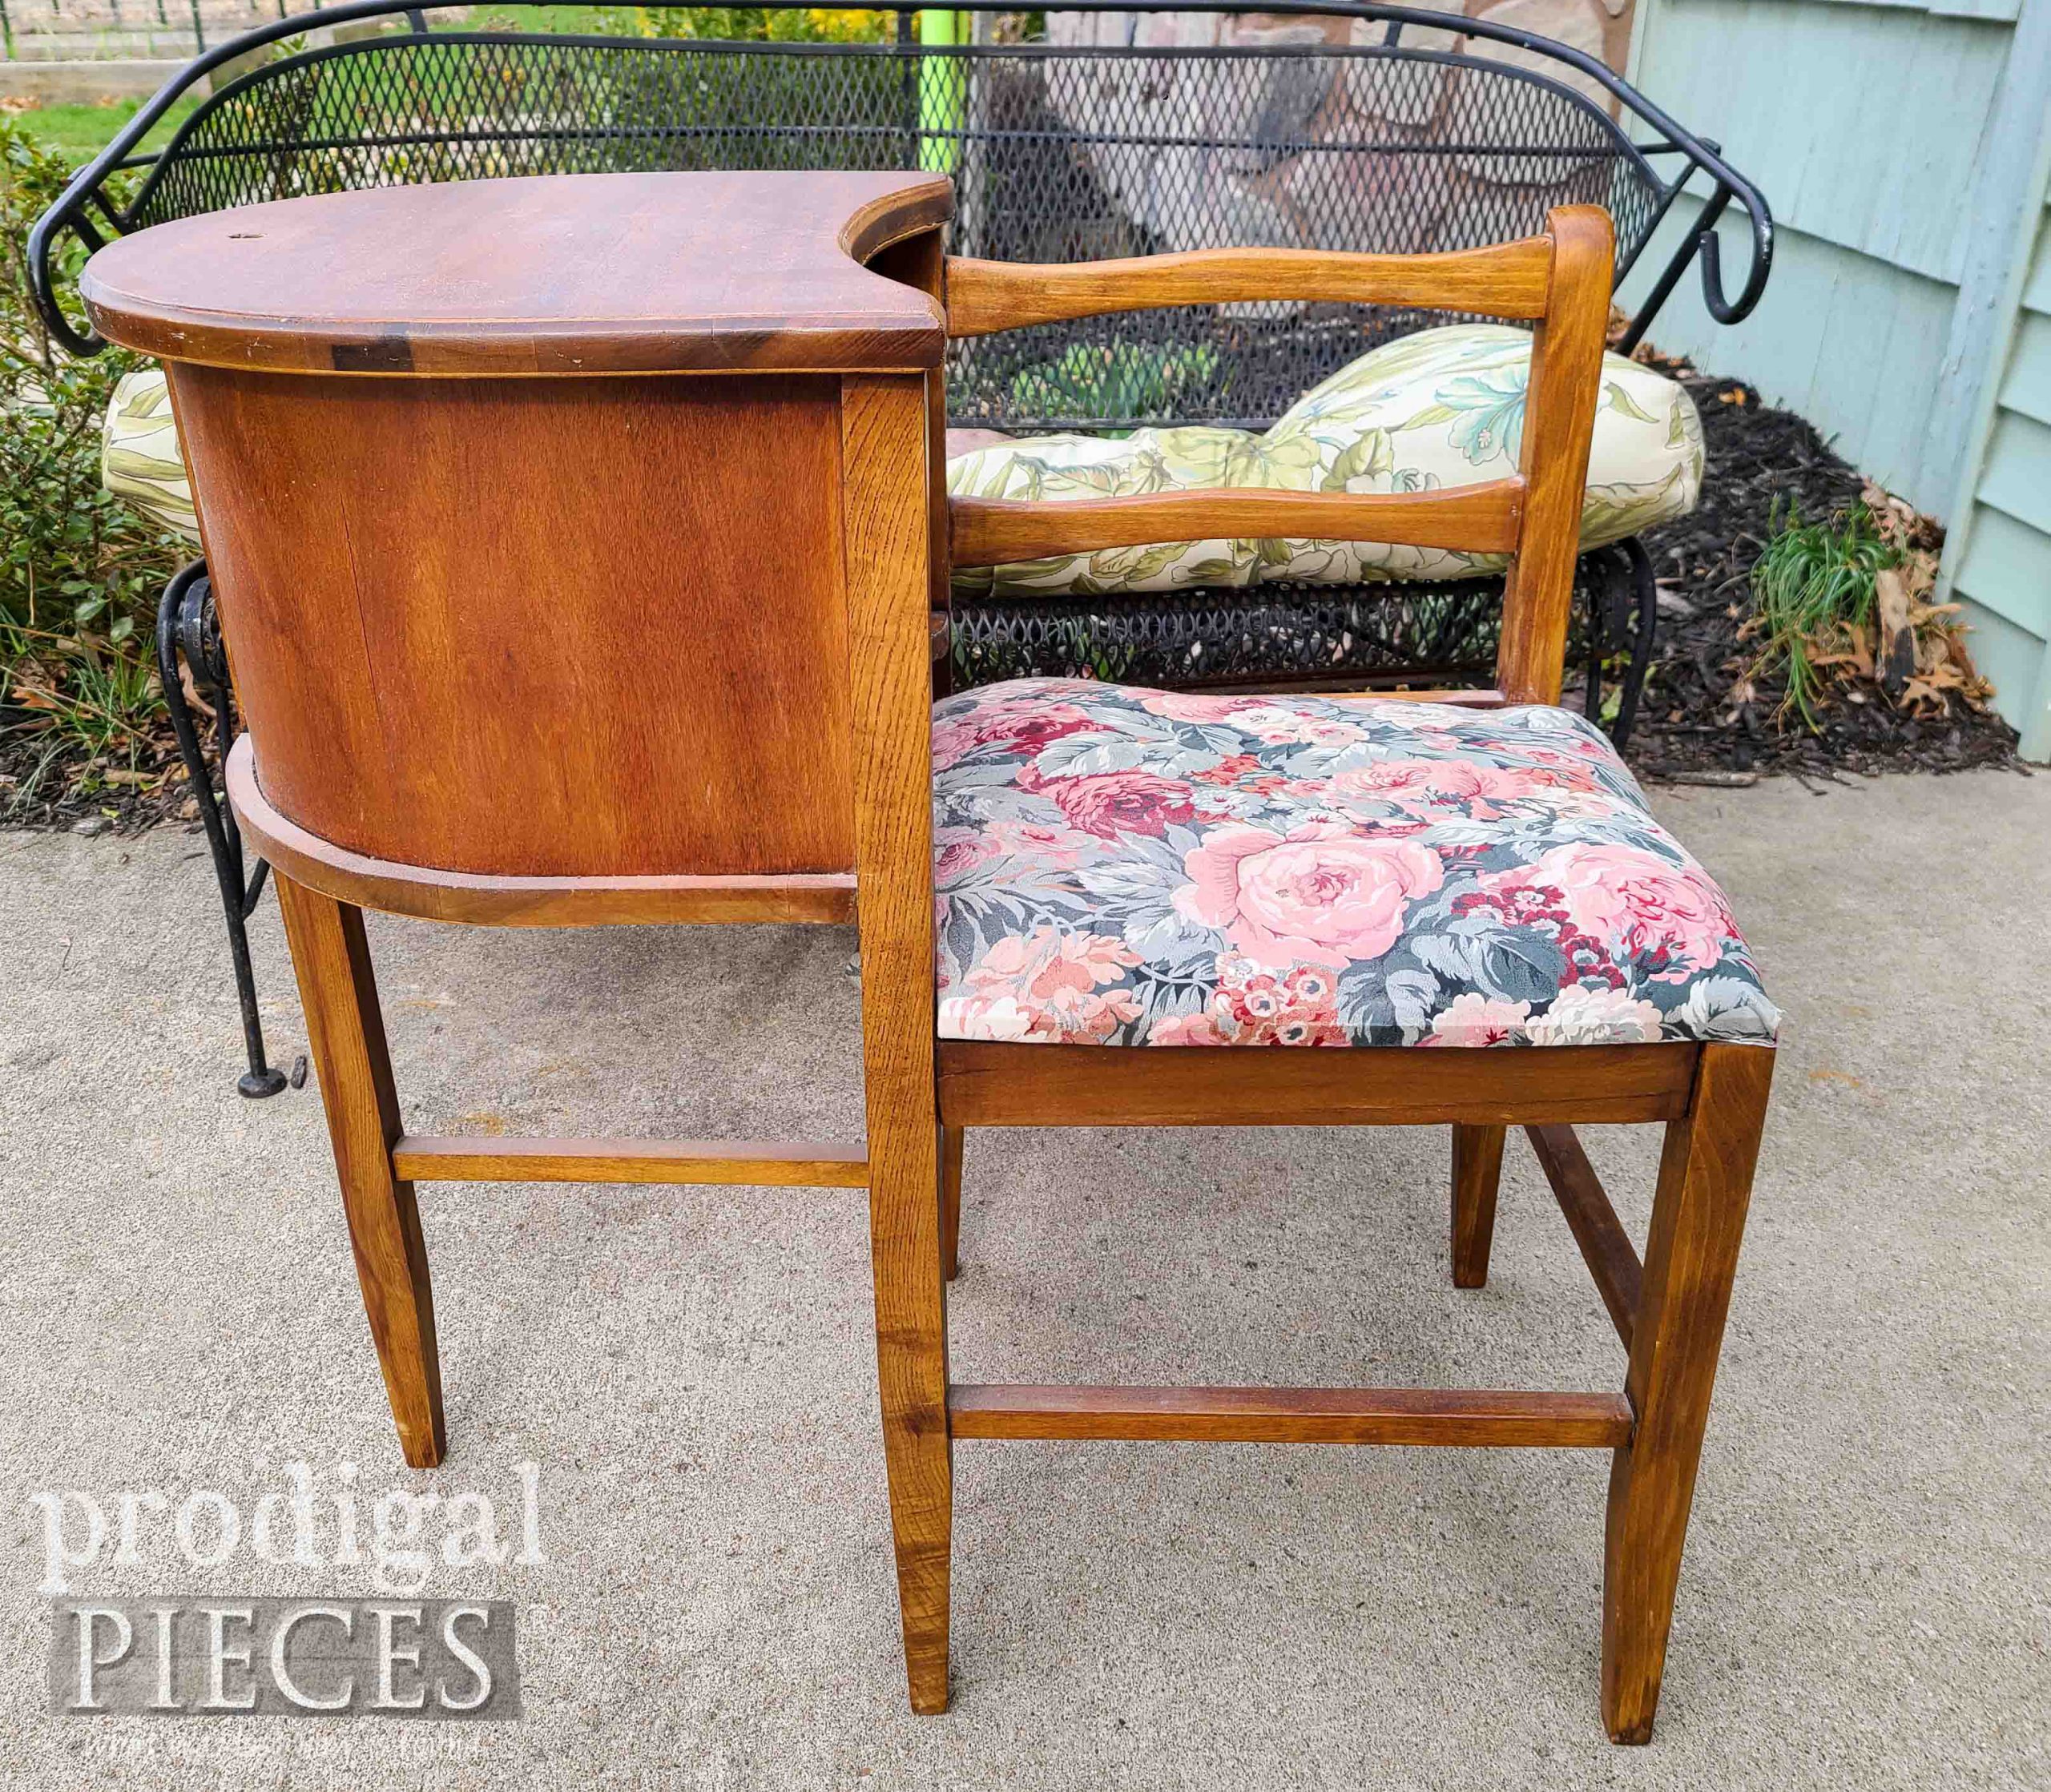 Vintage Gossip Chair Before Makeover by Larissa of Prodigal Pieces | prodigalpieces.com